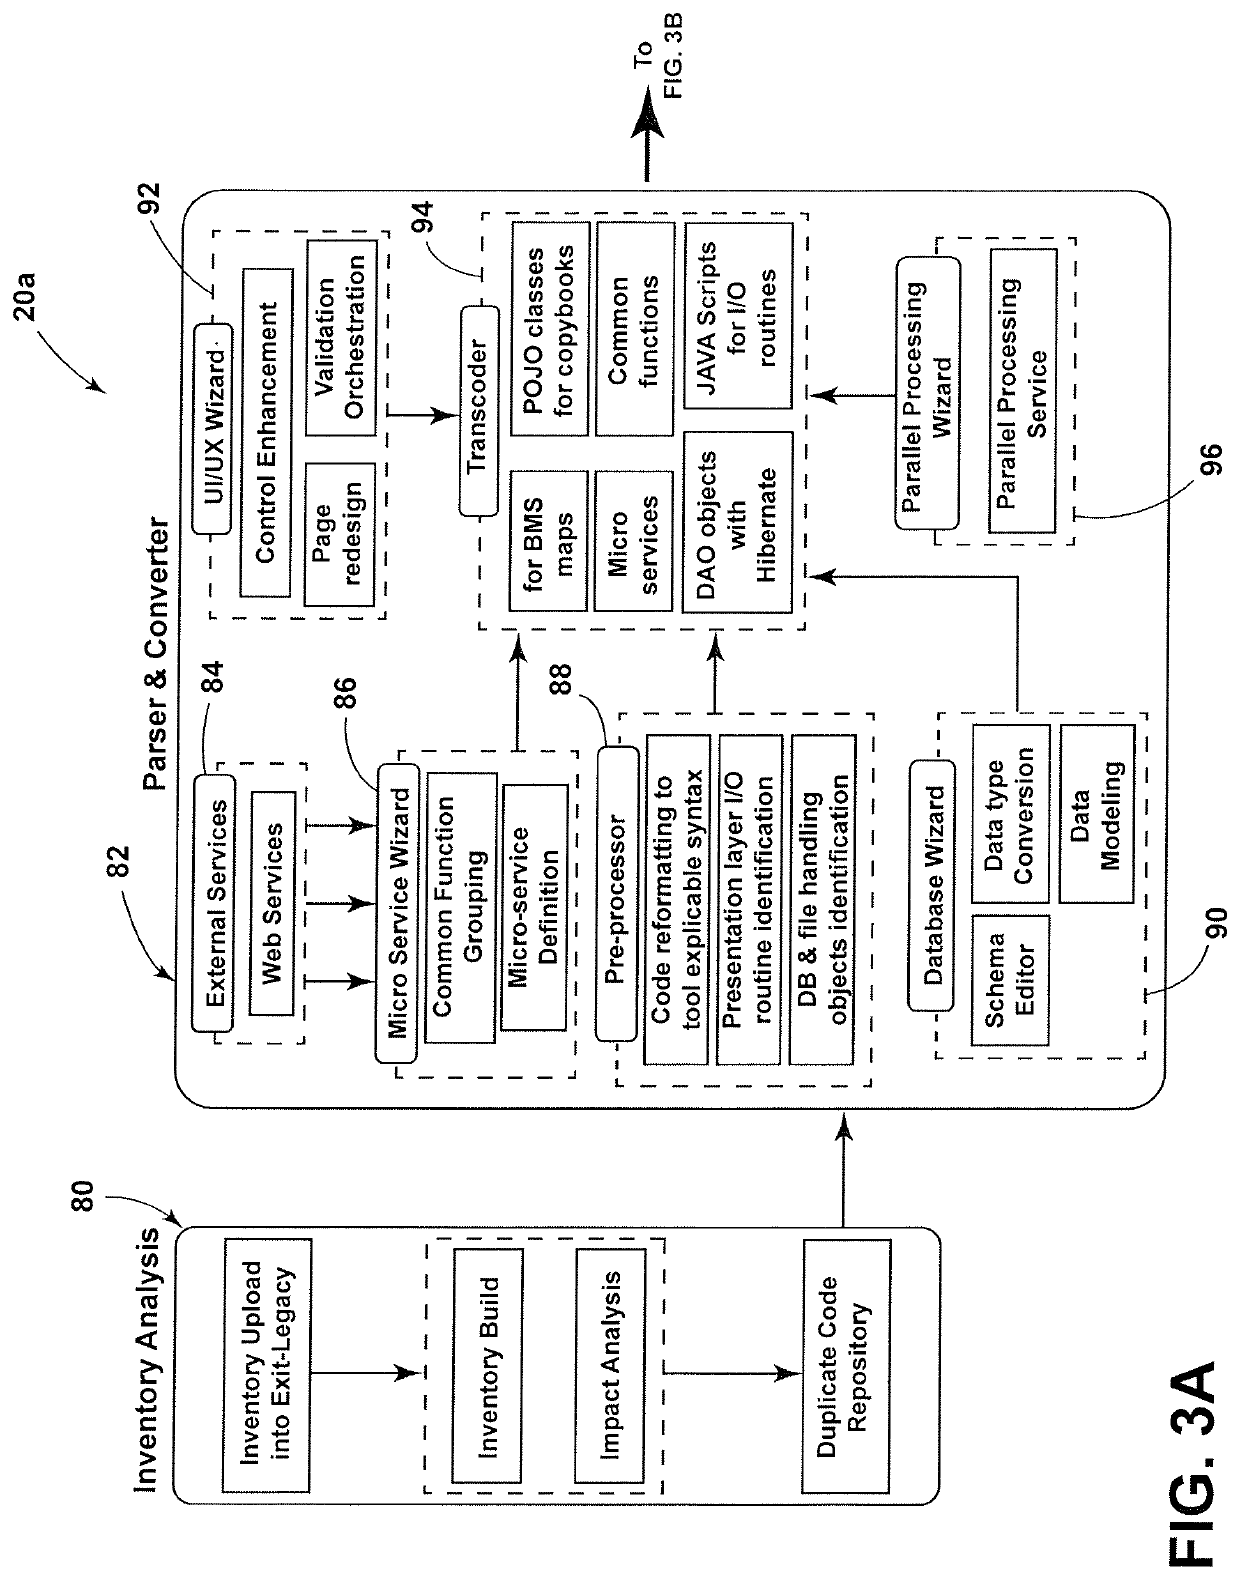 System and method for computer language migration using a re-architecture tool for decomposing a legacy system and recomposing a modernized system